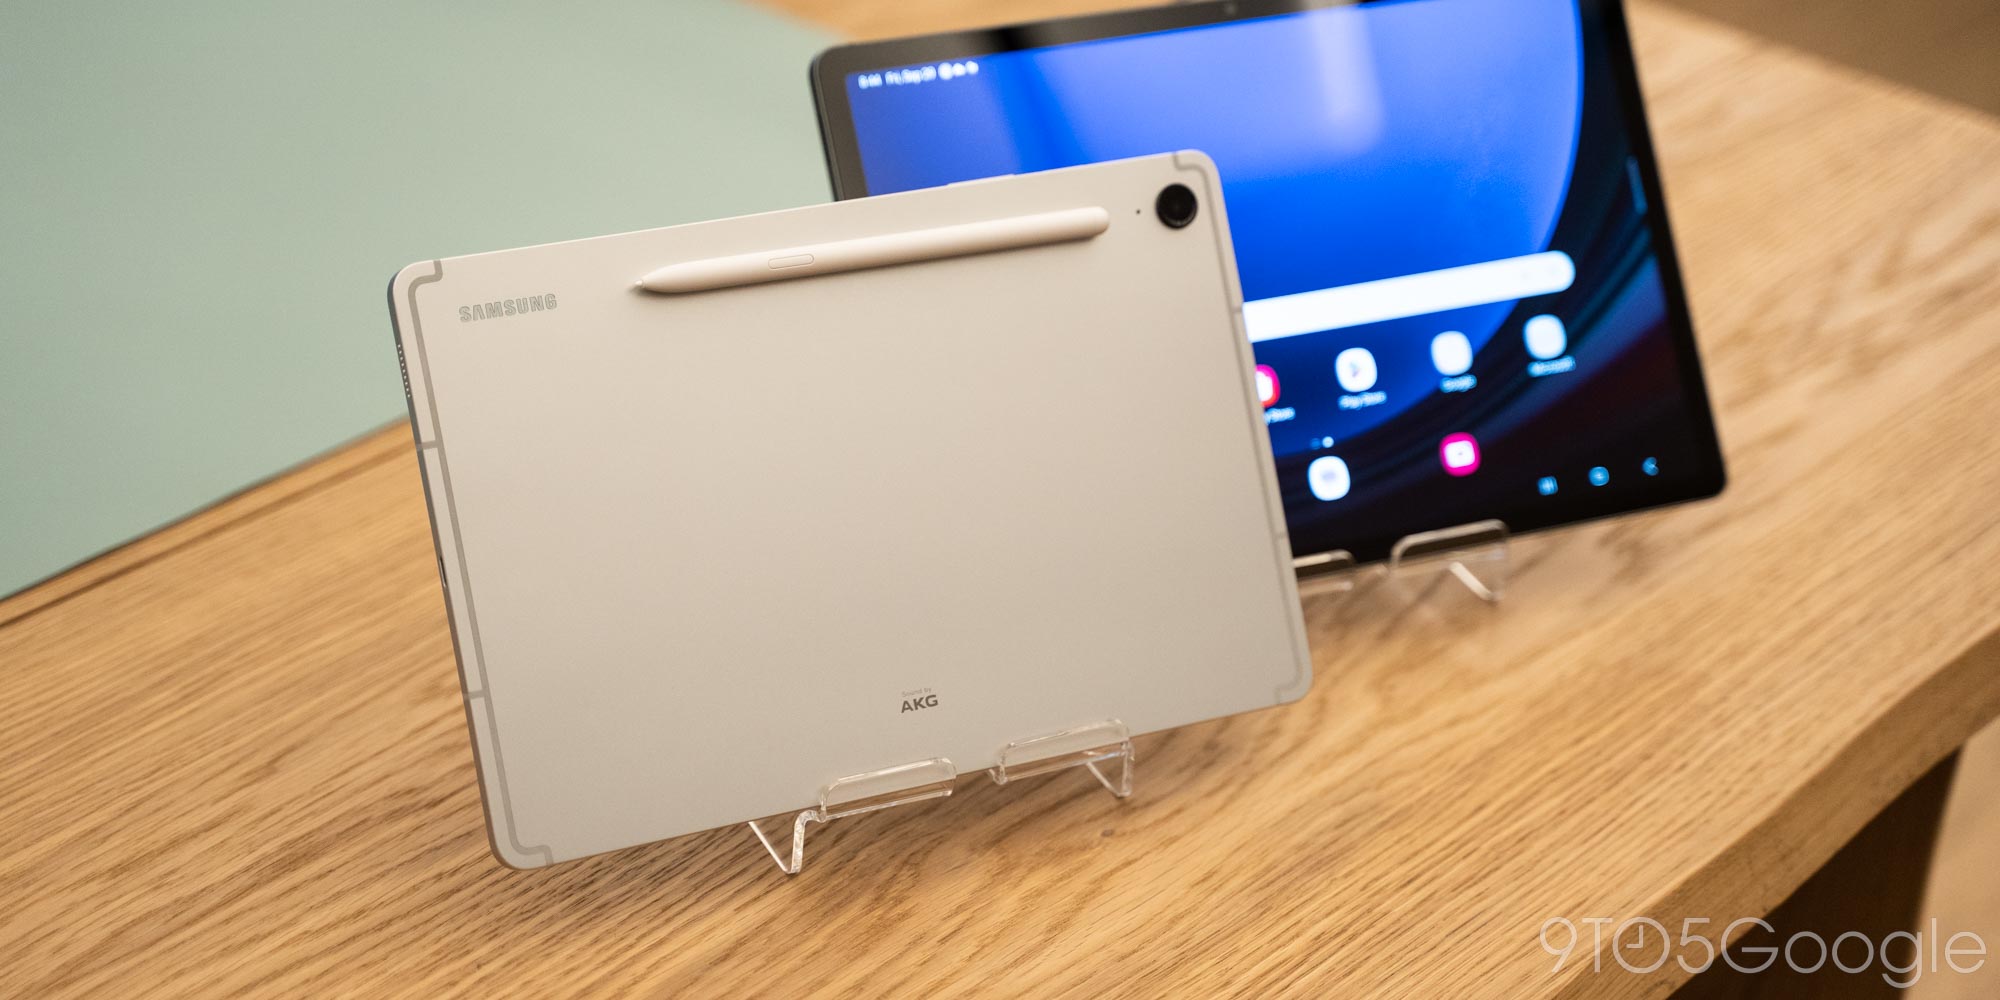 Galaxy Tab S9 FE series is a tempting entry into Android tablets